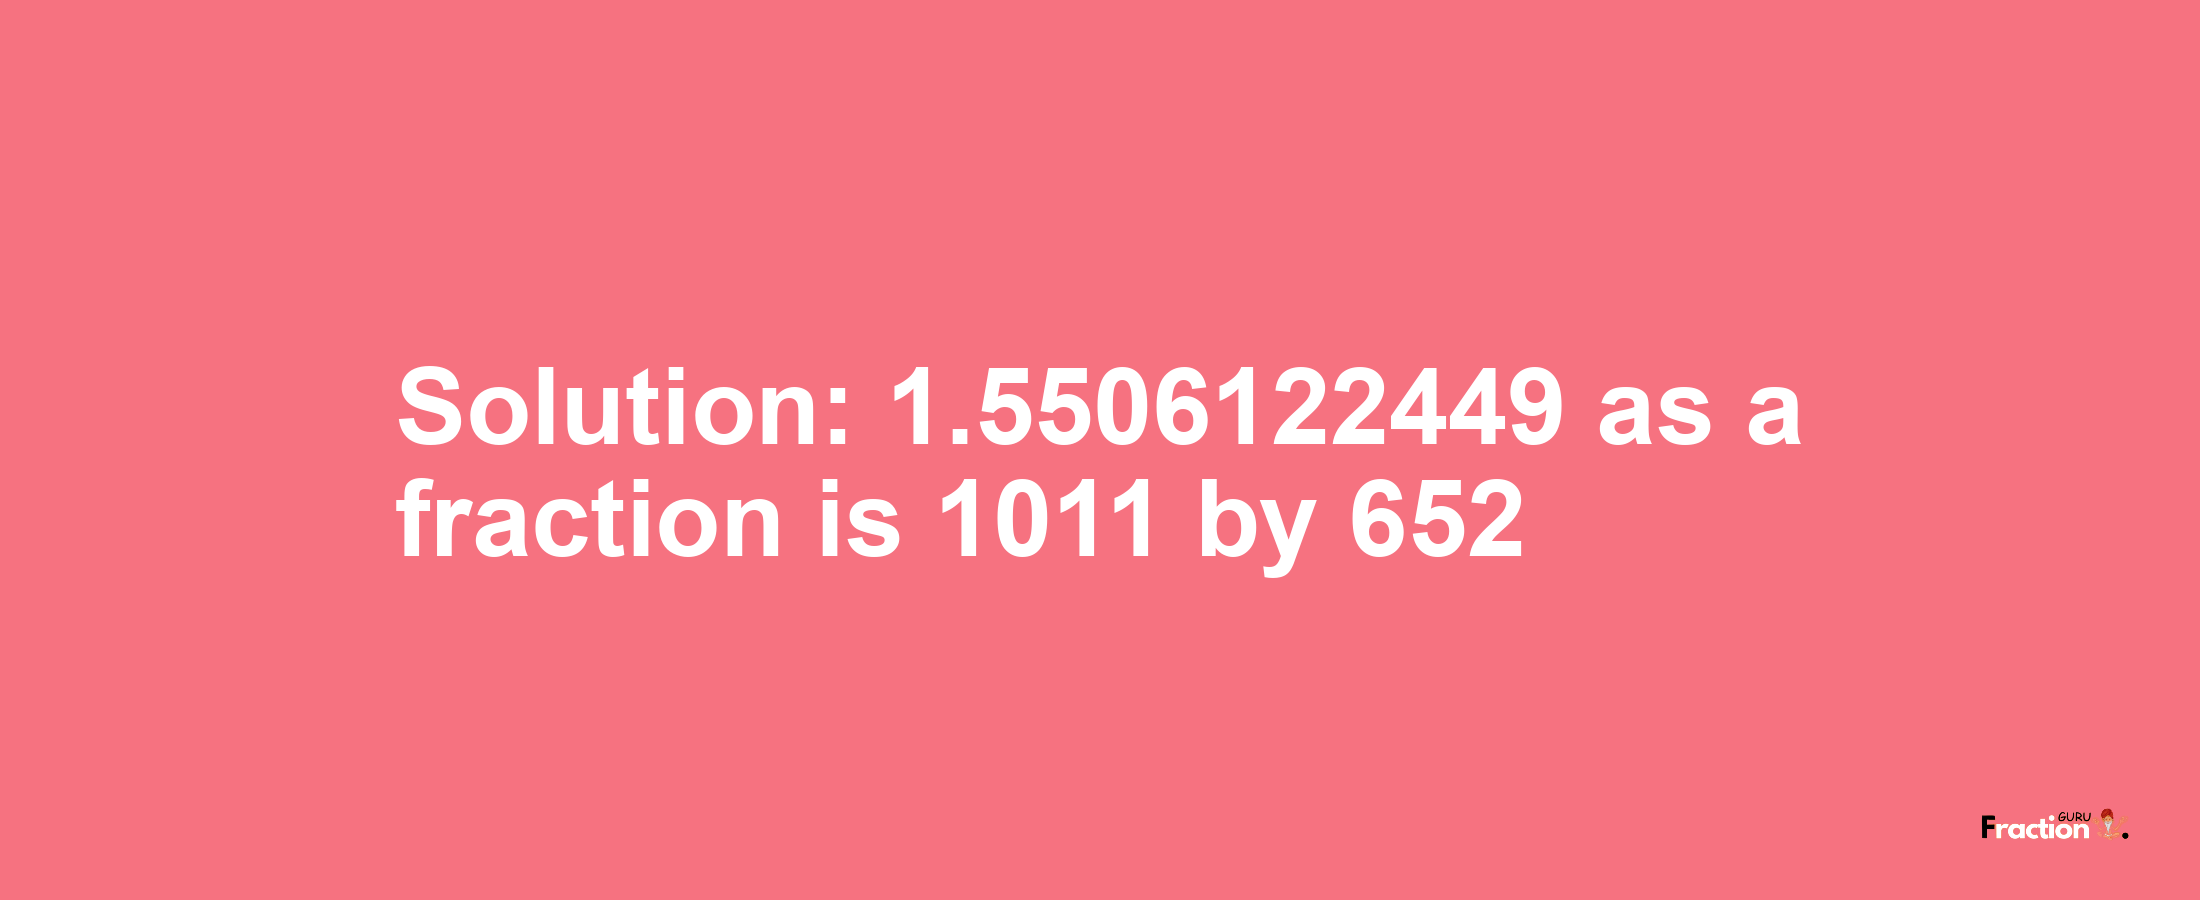 Solution:1.5506122449 as a fraction is 1011/652